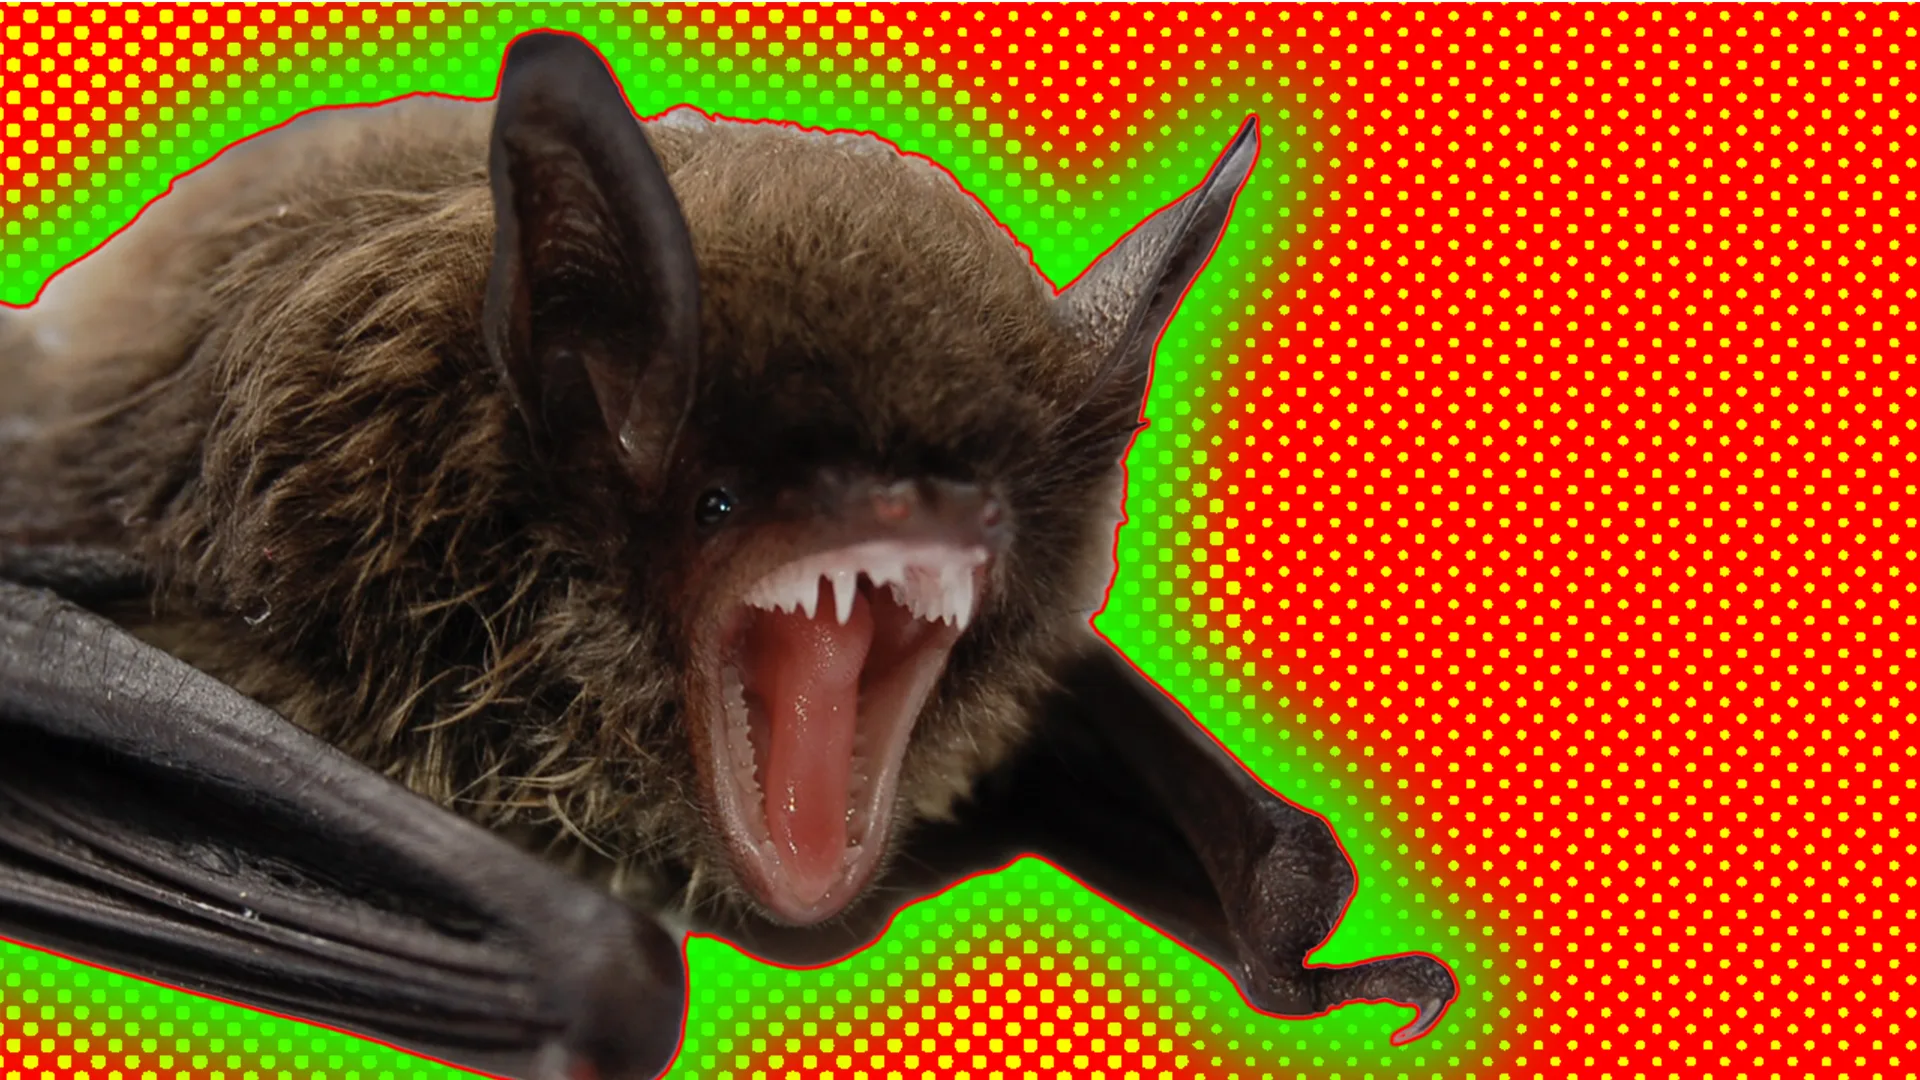 Bat showing it's fangs outlined by a green halo effect on a red and yellow spotty background